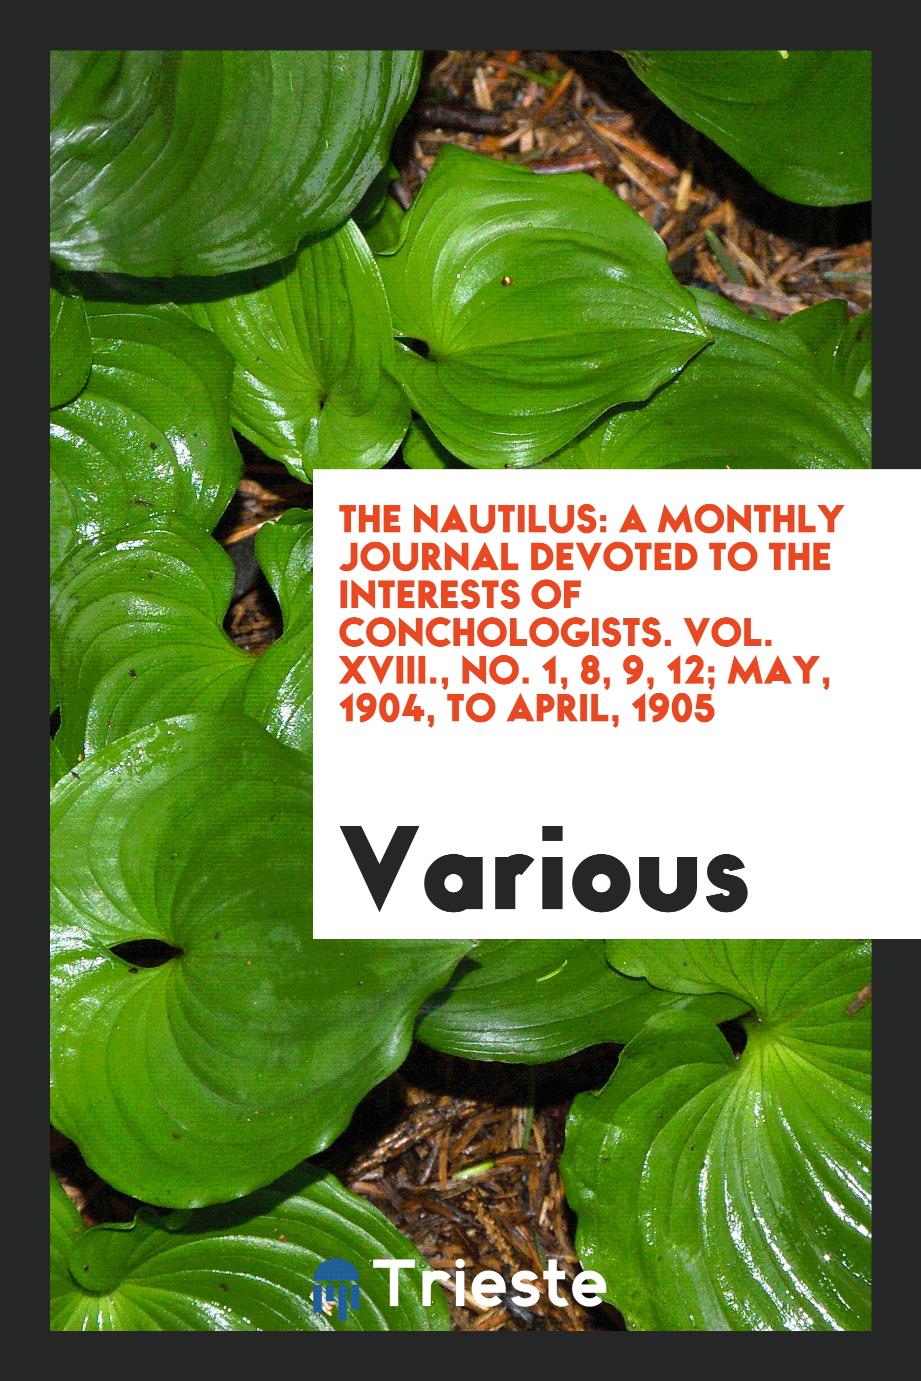 The Nautilus: A monthly journal devoted to the interests of conchologists. Vol. XVIII., No. 1, 8, 9, 12; May, 1904, to April, 1905